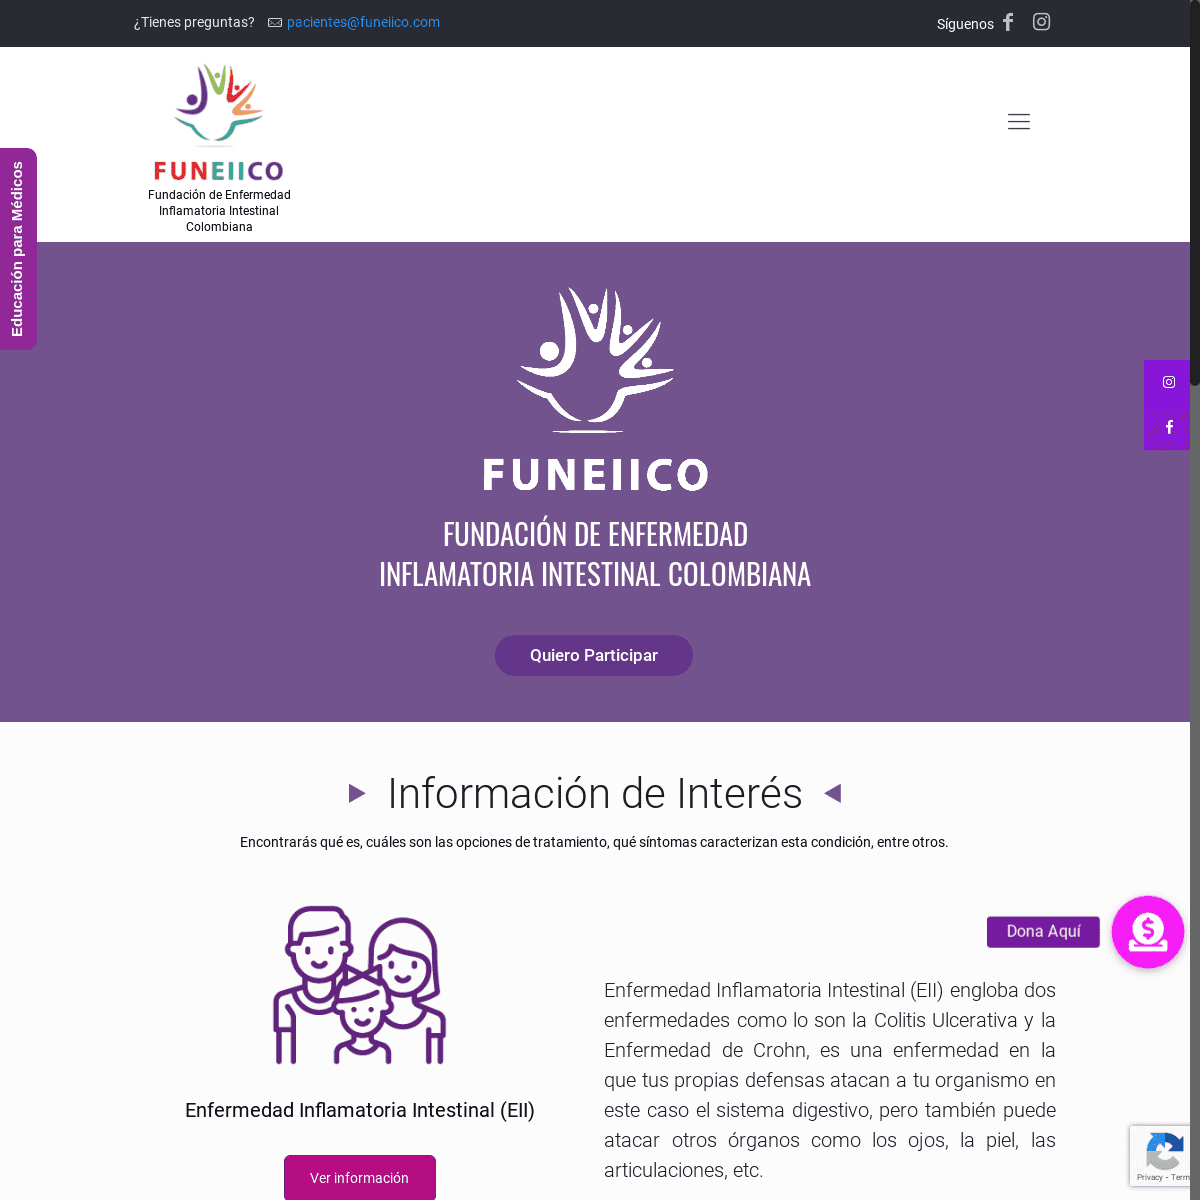 A complete backup of https://funeiico.com